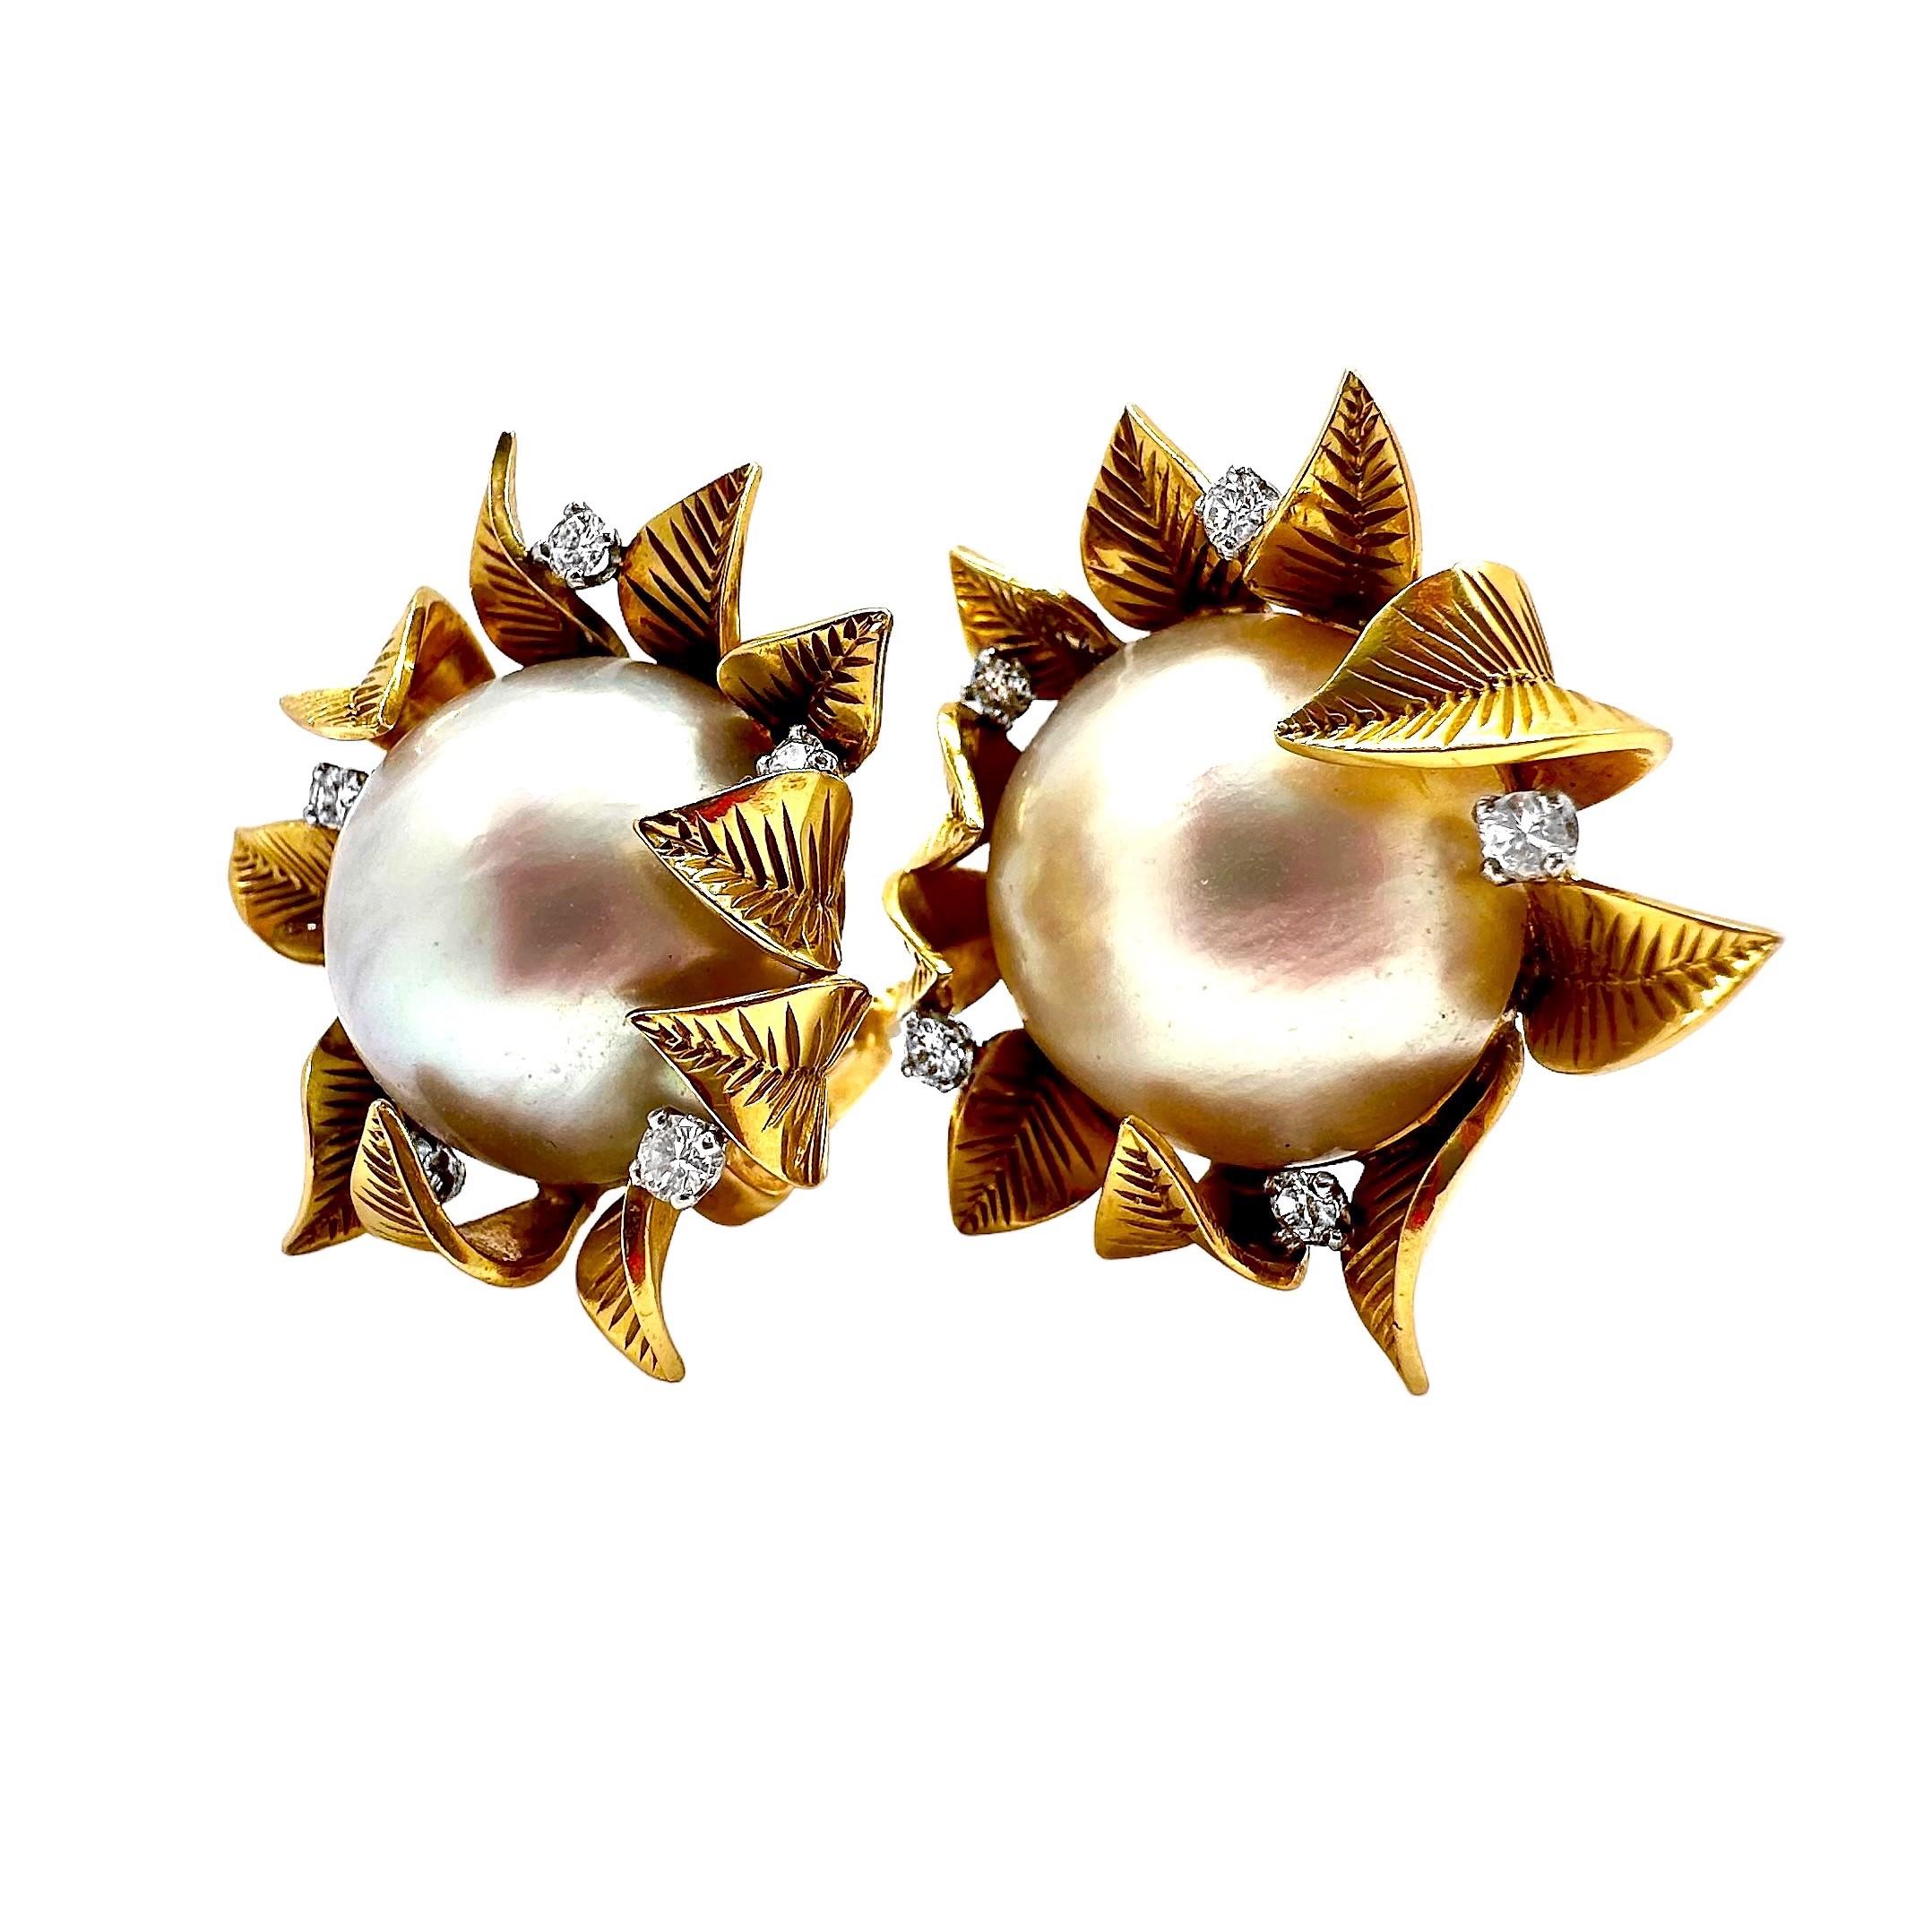 French 18K Gold Earrings with Mobe Pearls Surrounded by Leaves and Diamonds For Sale 3